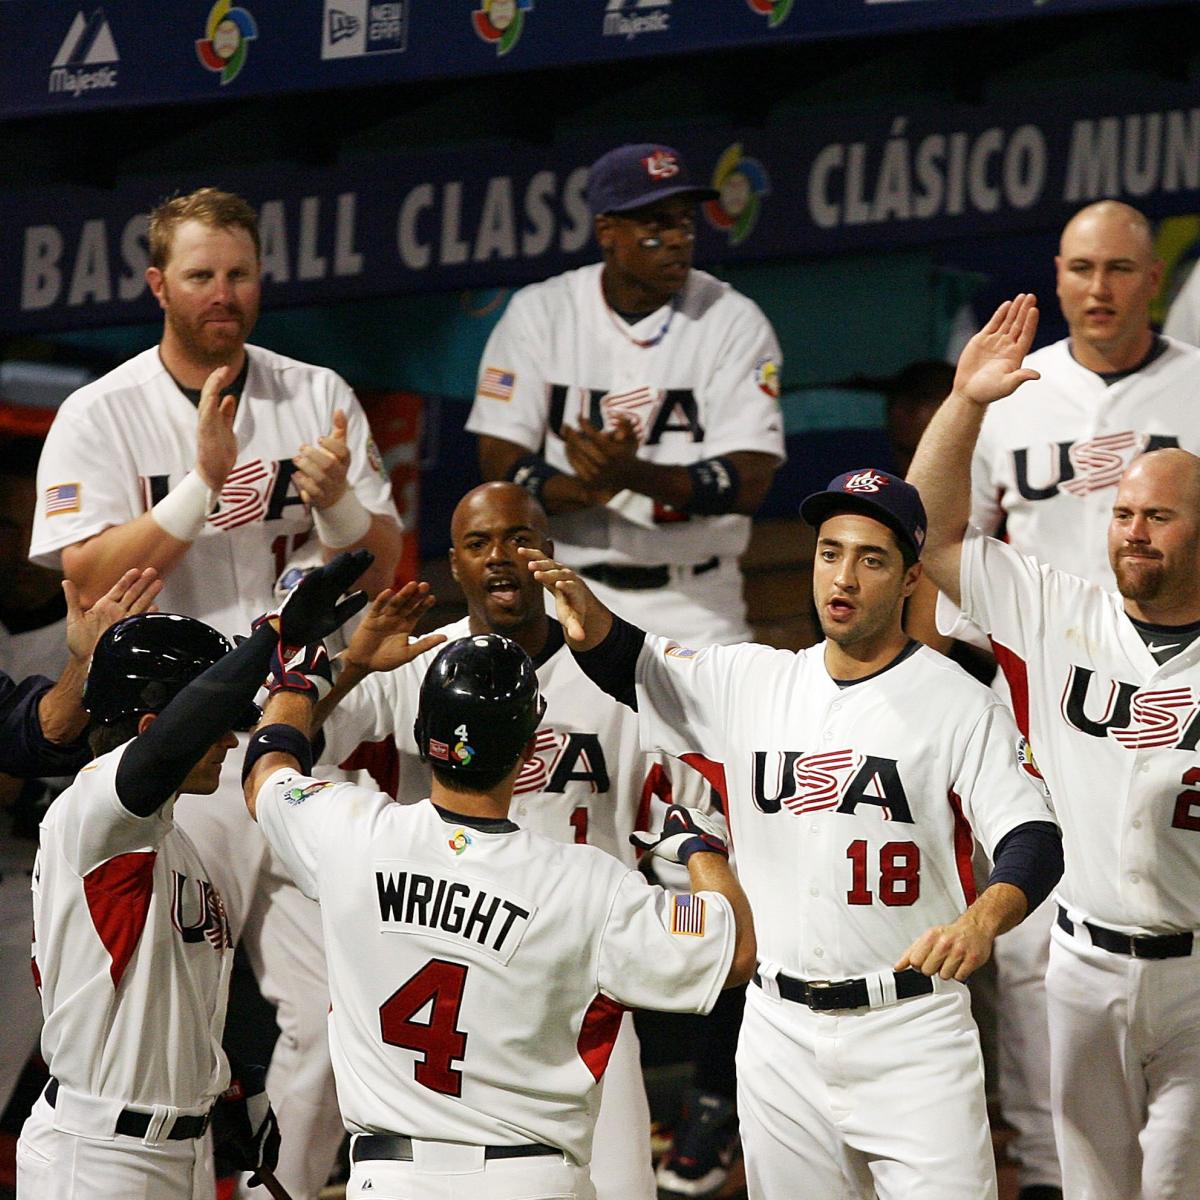 Style and substance: Team USA finds itself in winning World Baseball Classic